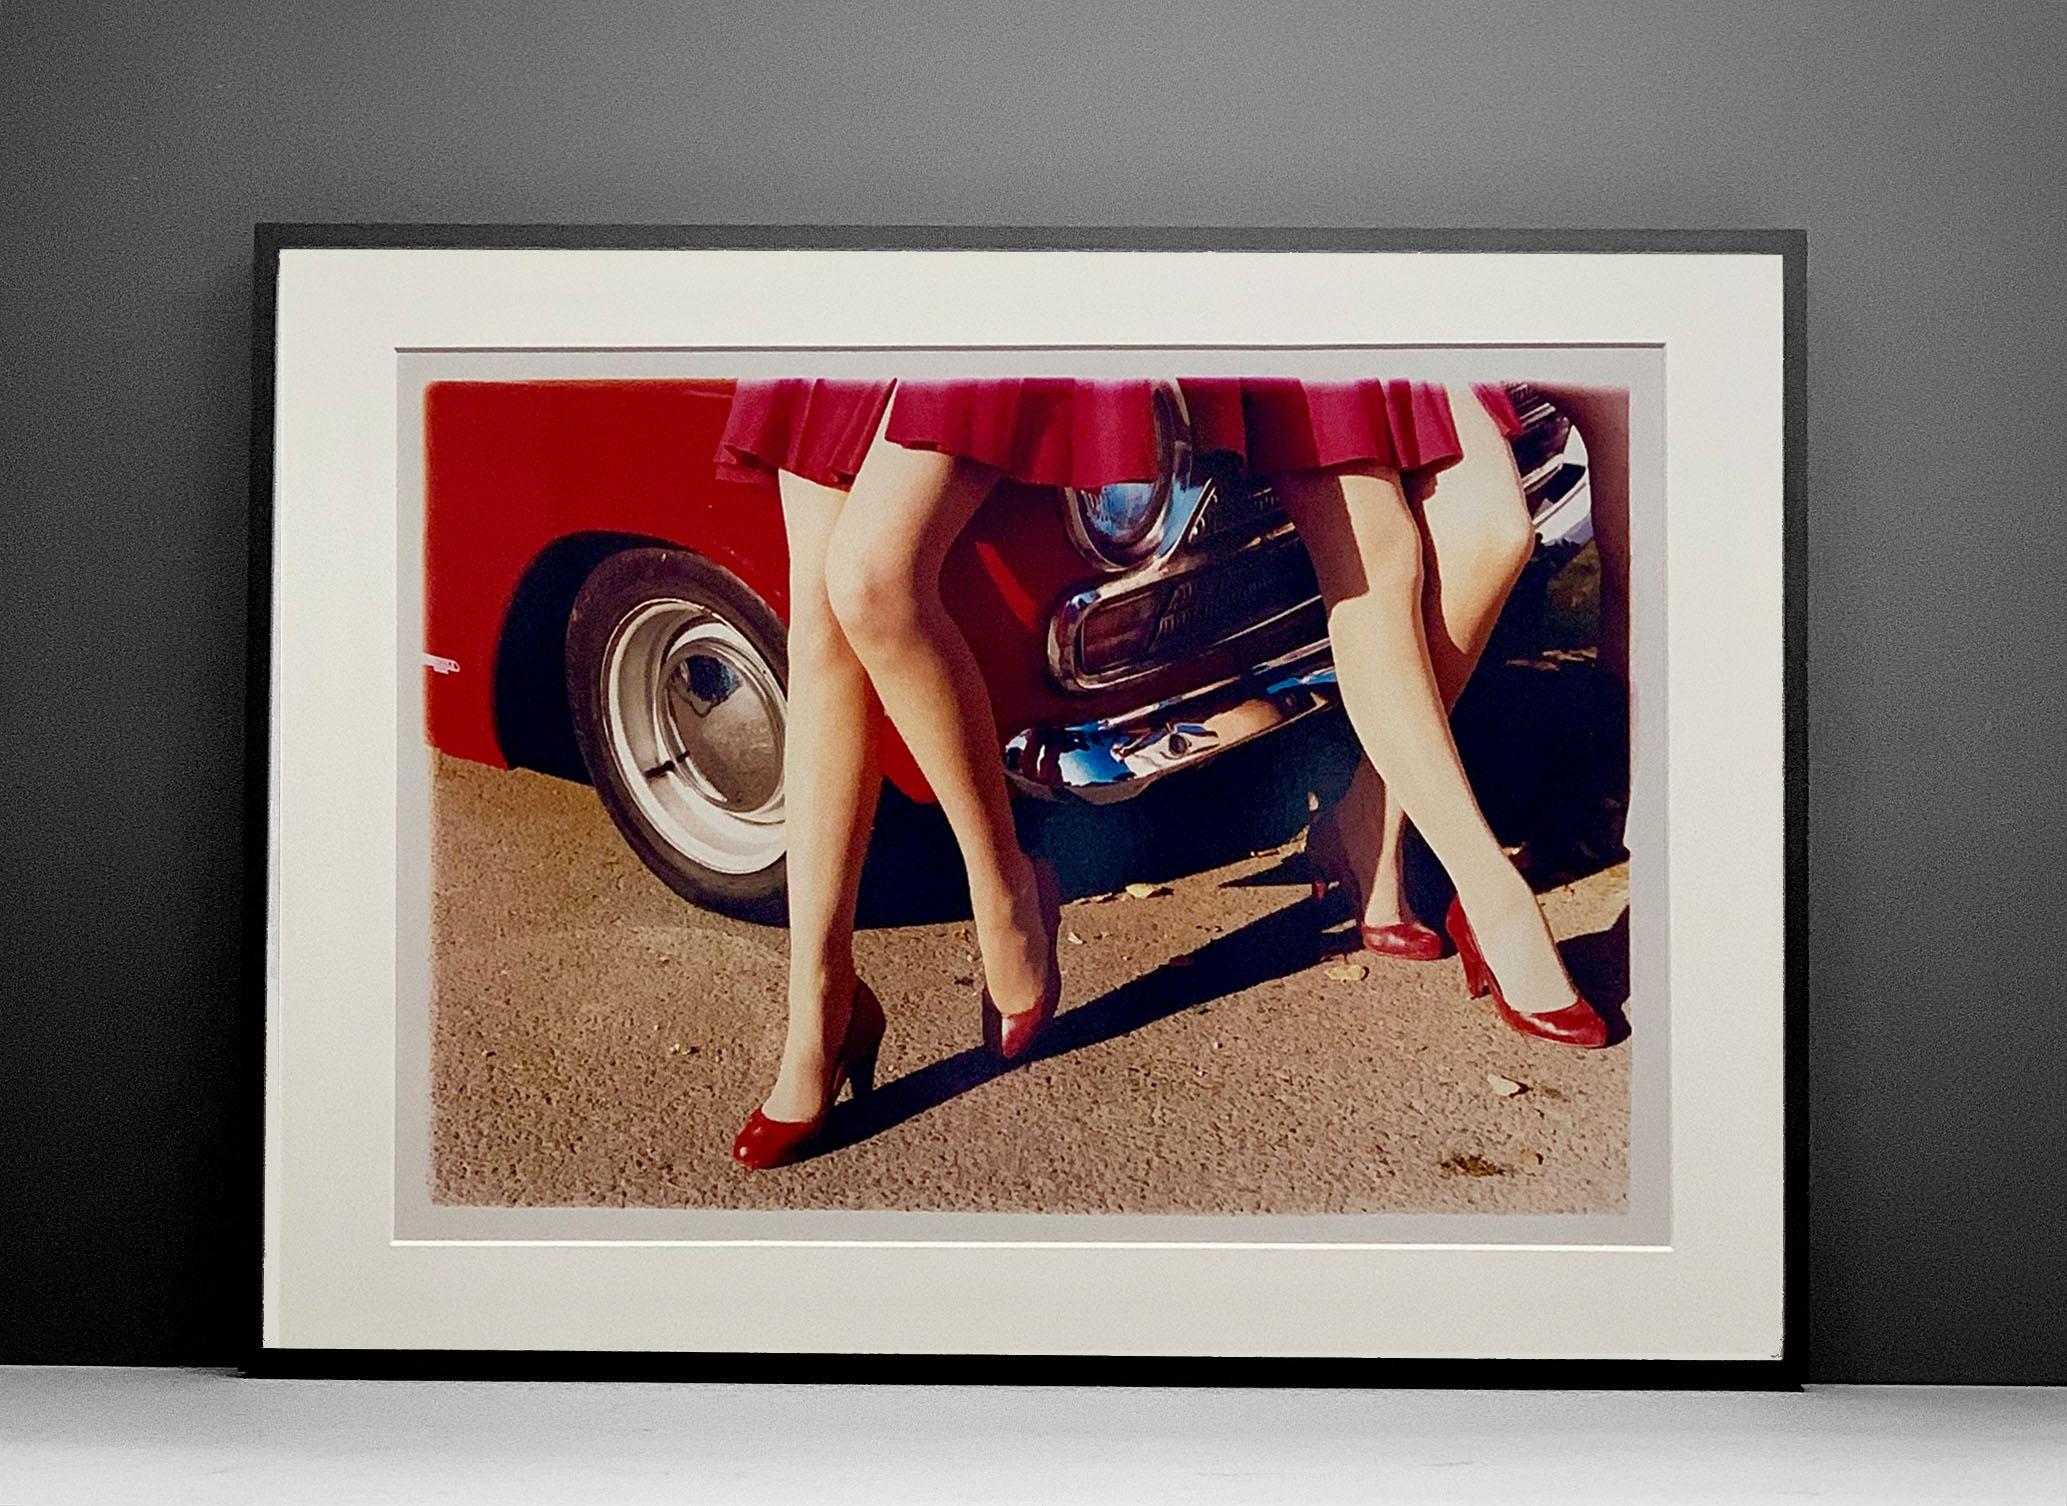 This gorgeous gorgeous piece, 'Glamour Cabs' taken at the glamorous retro event Goodwood Revival, perfectly captures elegant feminine sophistication with a vintage vibe. A nod to the film Carry on Cabbie.
From Richard Heeps Man's Ruin, this artwork